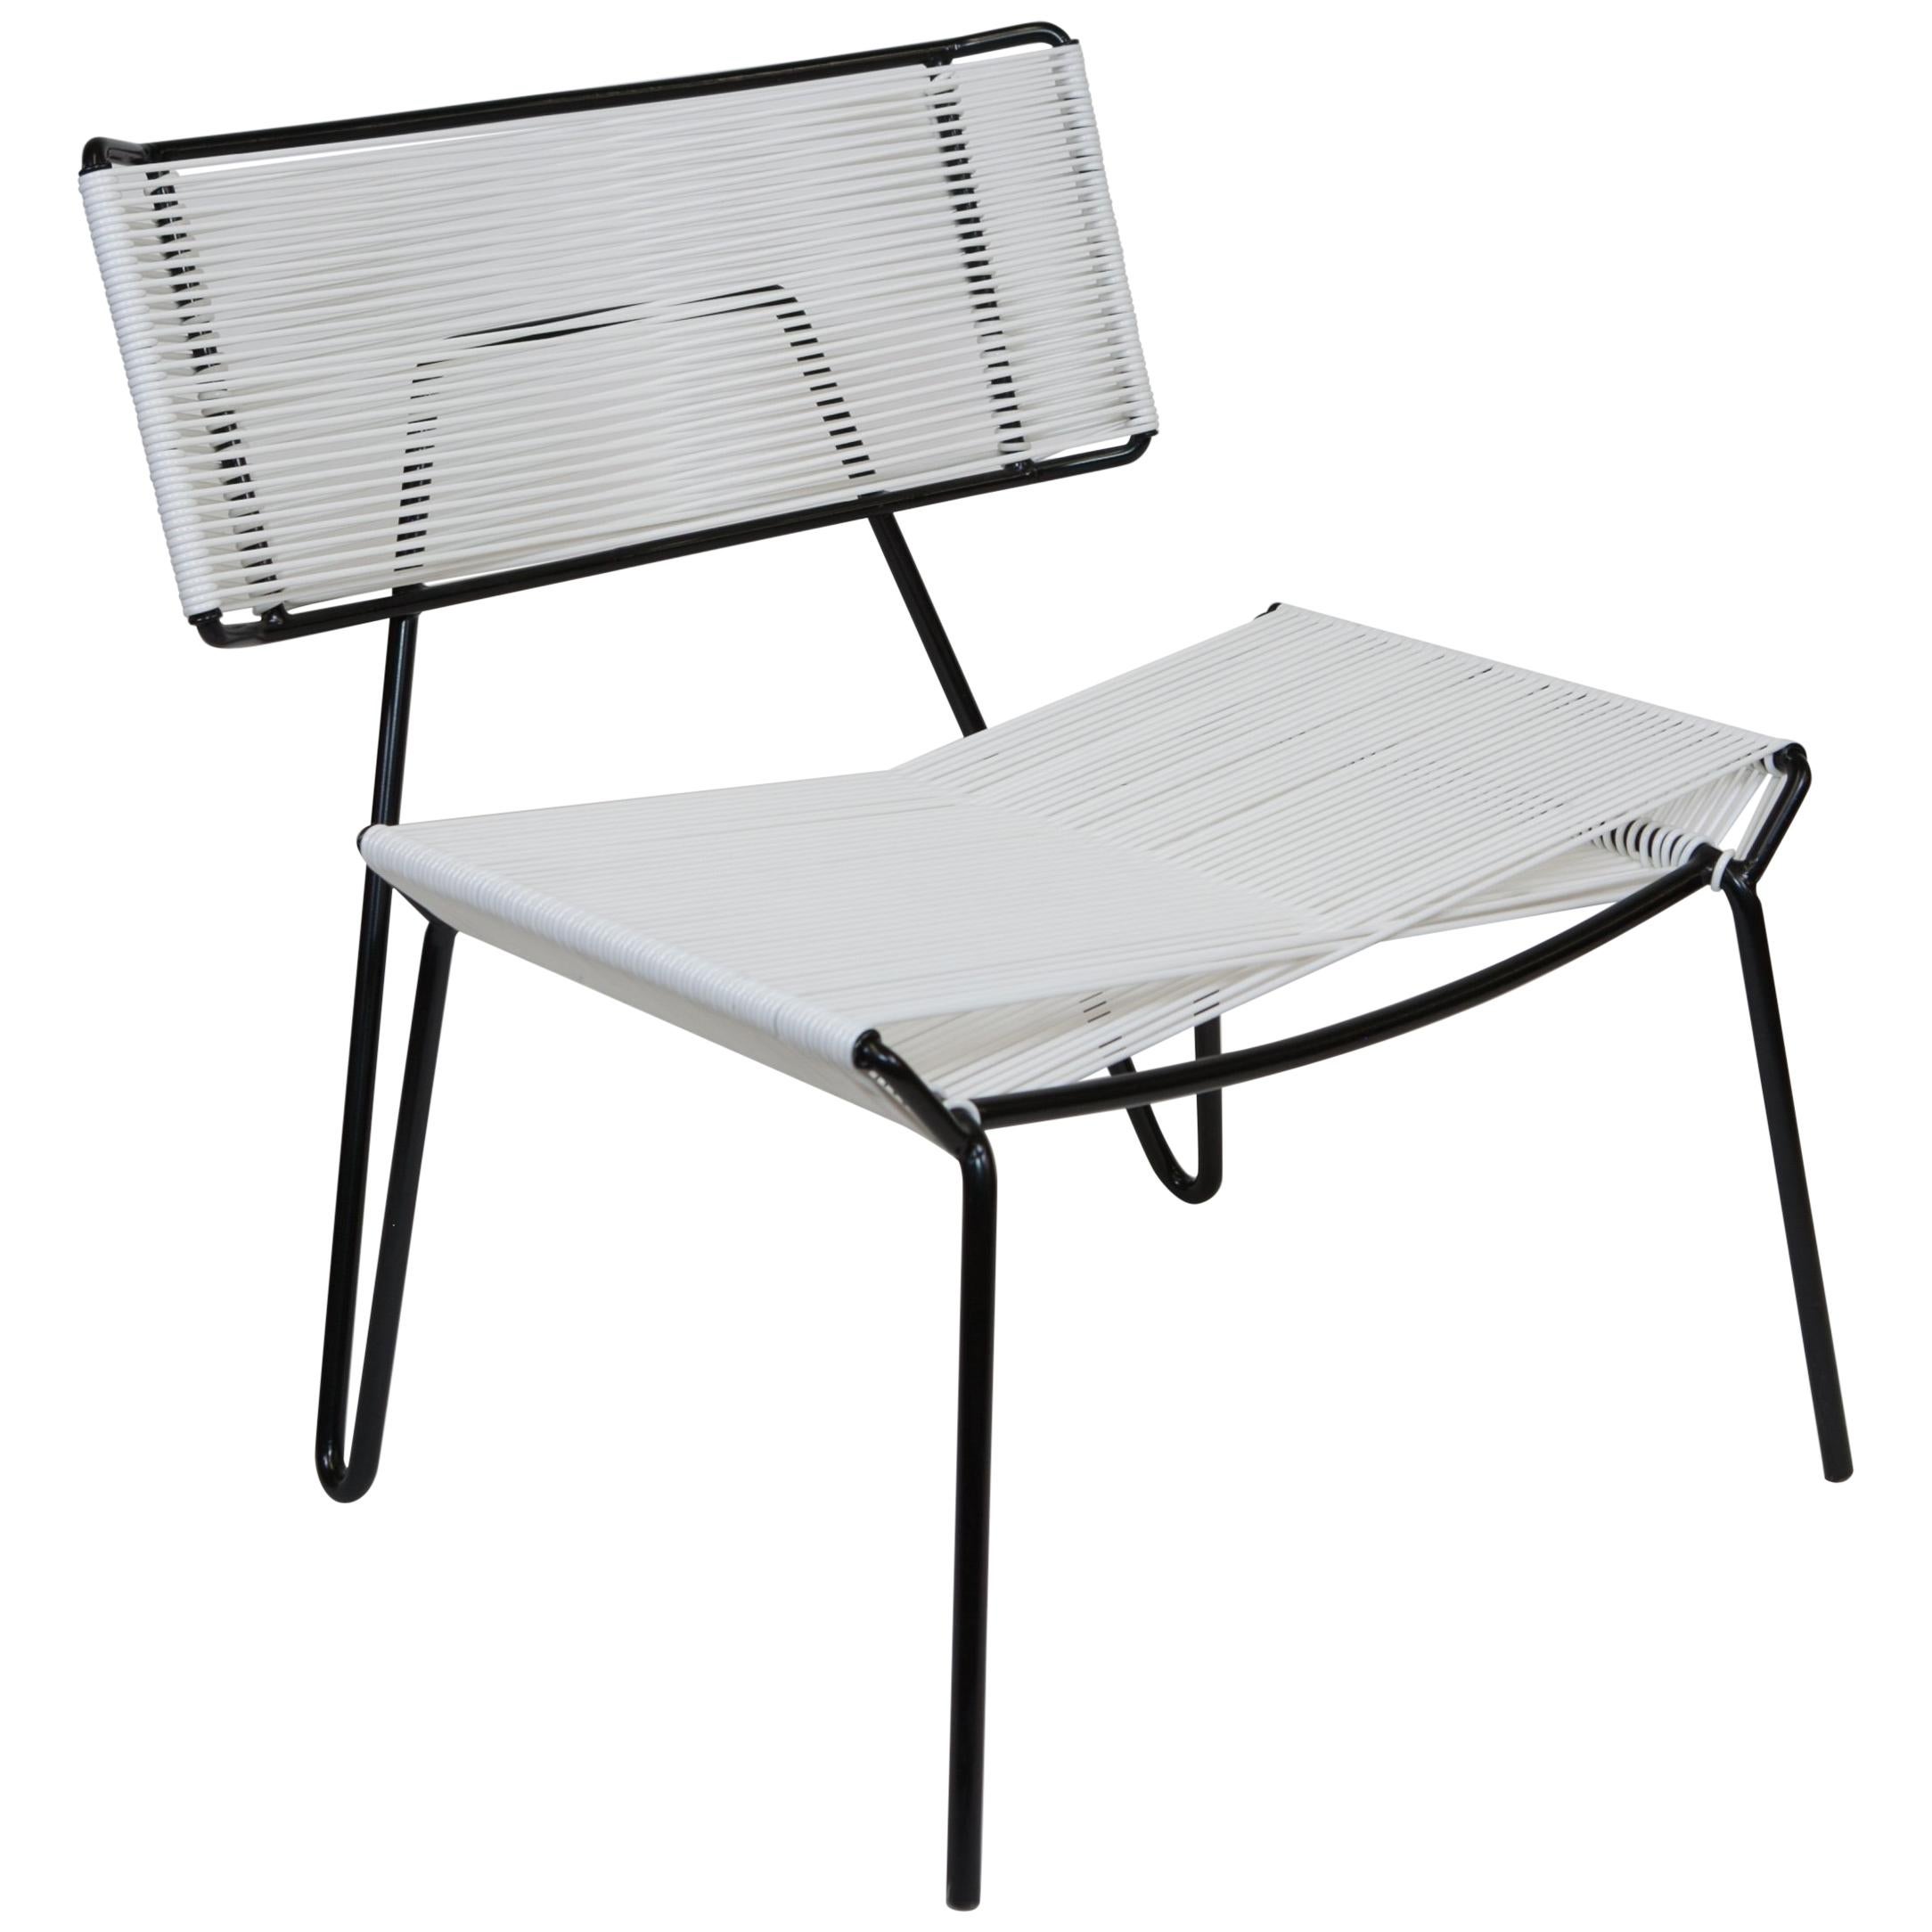 Handmade Midcentury Style Outdoor Lounge Chair, Black with White PVC, in Stock